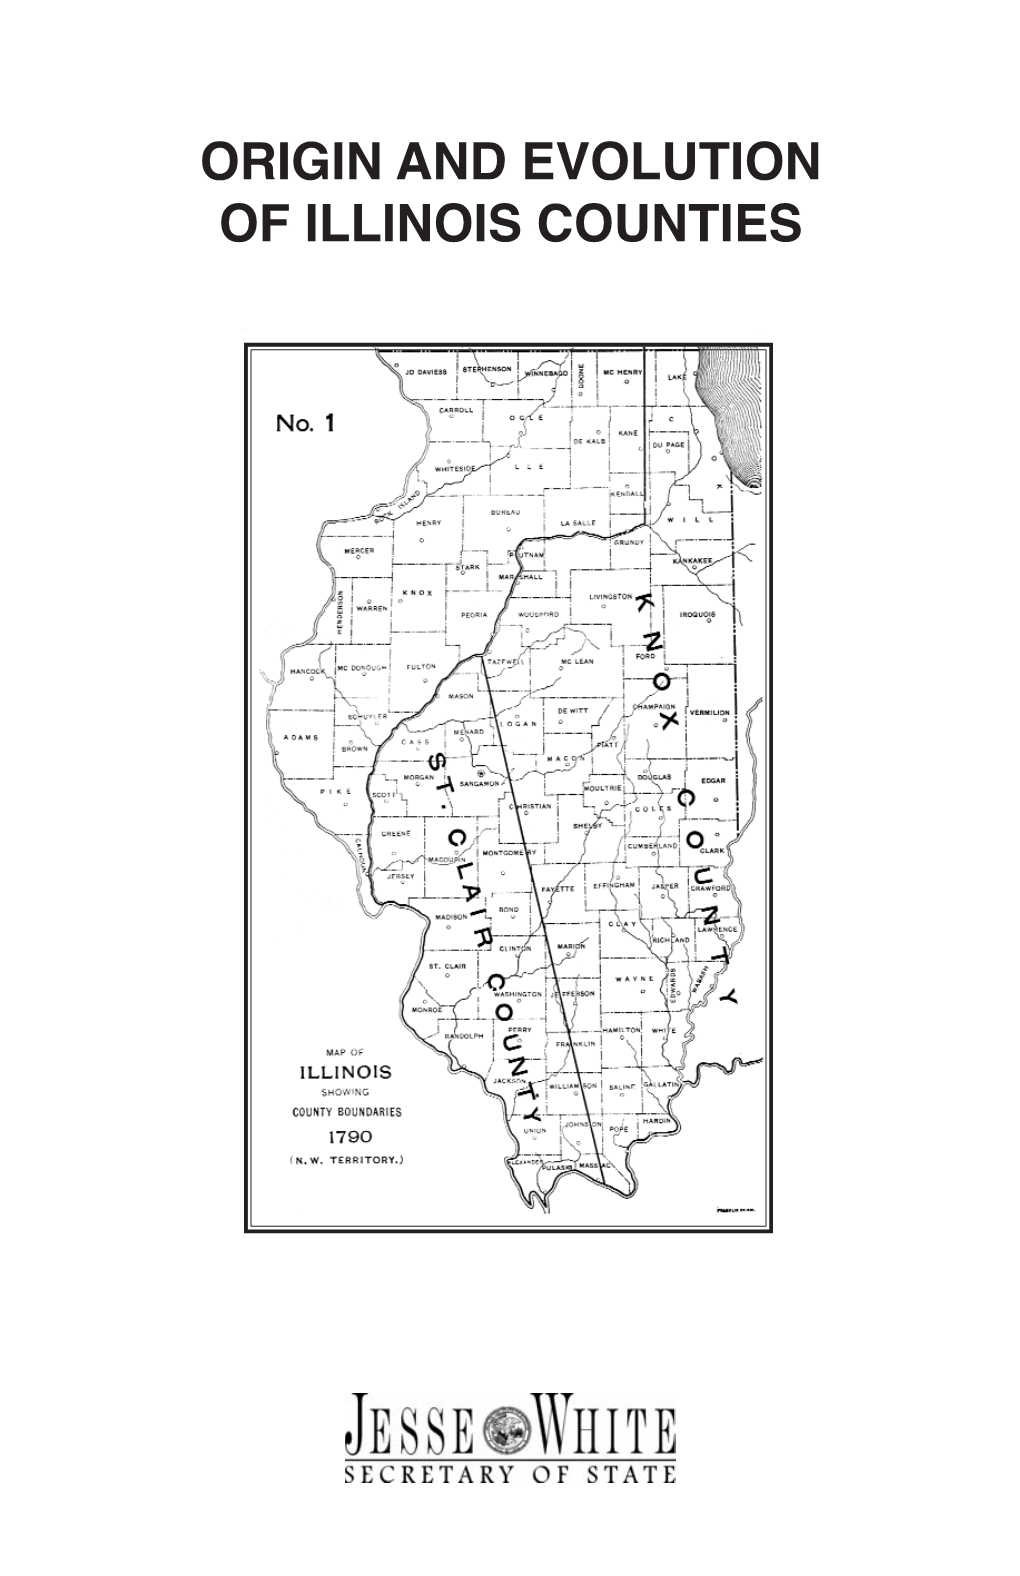 ORIGIN and EVOLUTION of ILLINOIS COUNTIES I PUB 15.10:Layout 1 3/16/10 8:54 AM Page 1